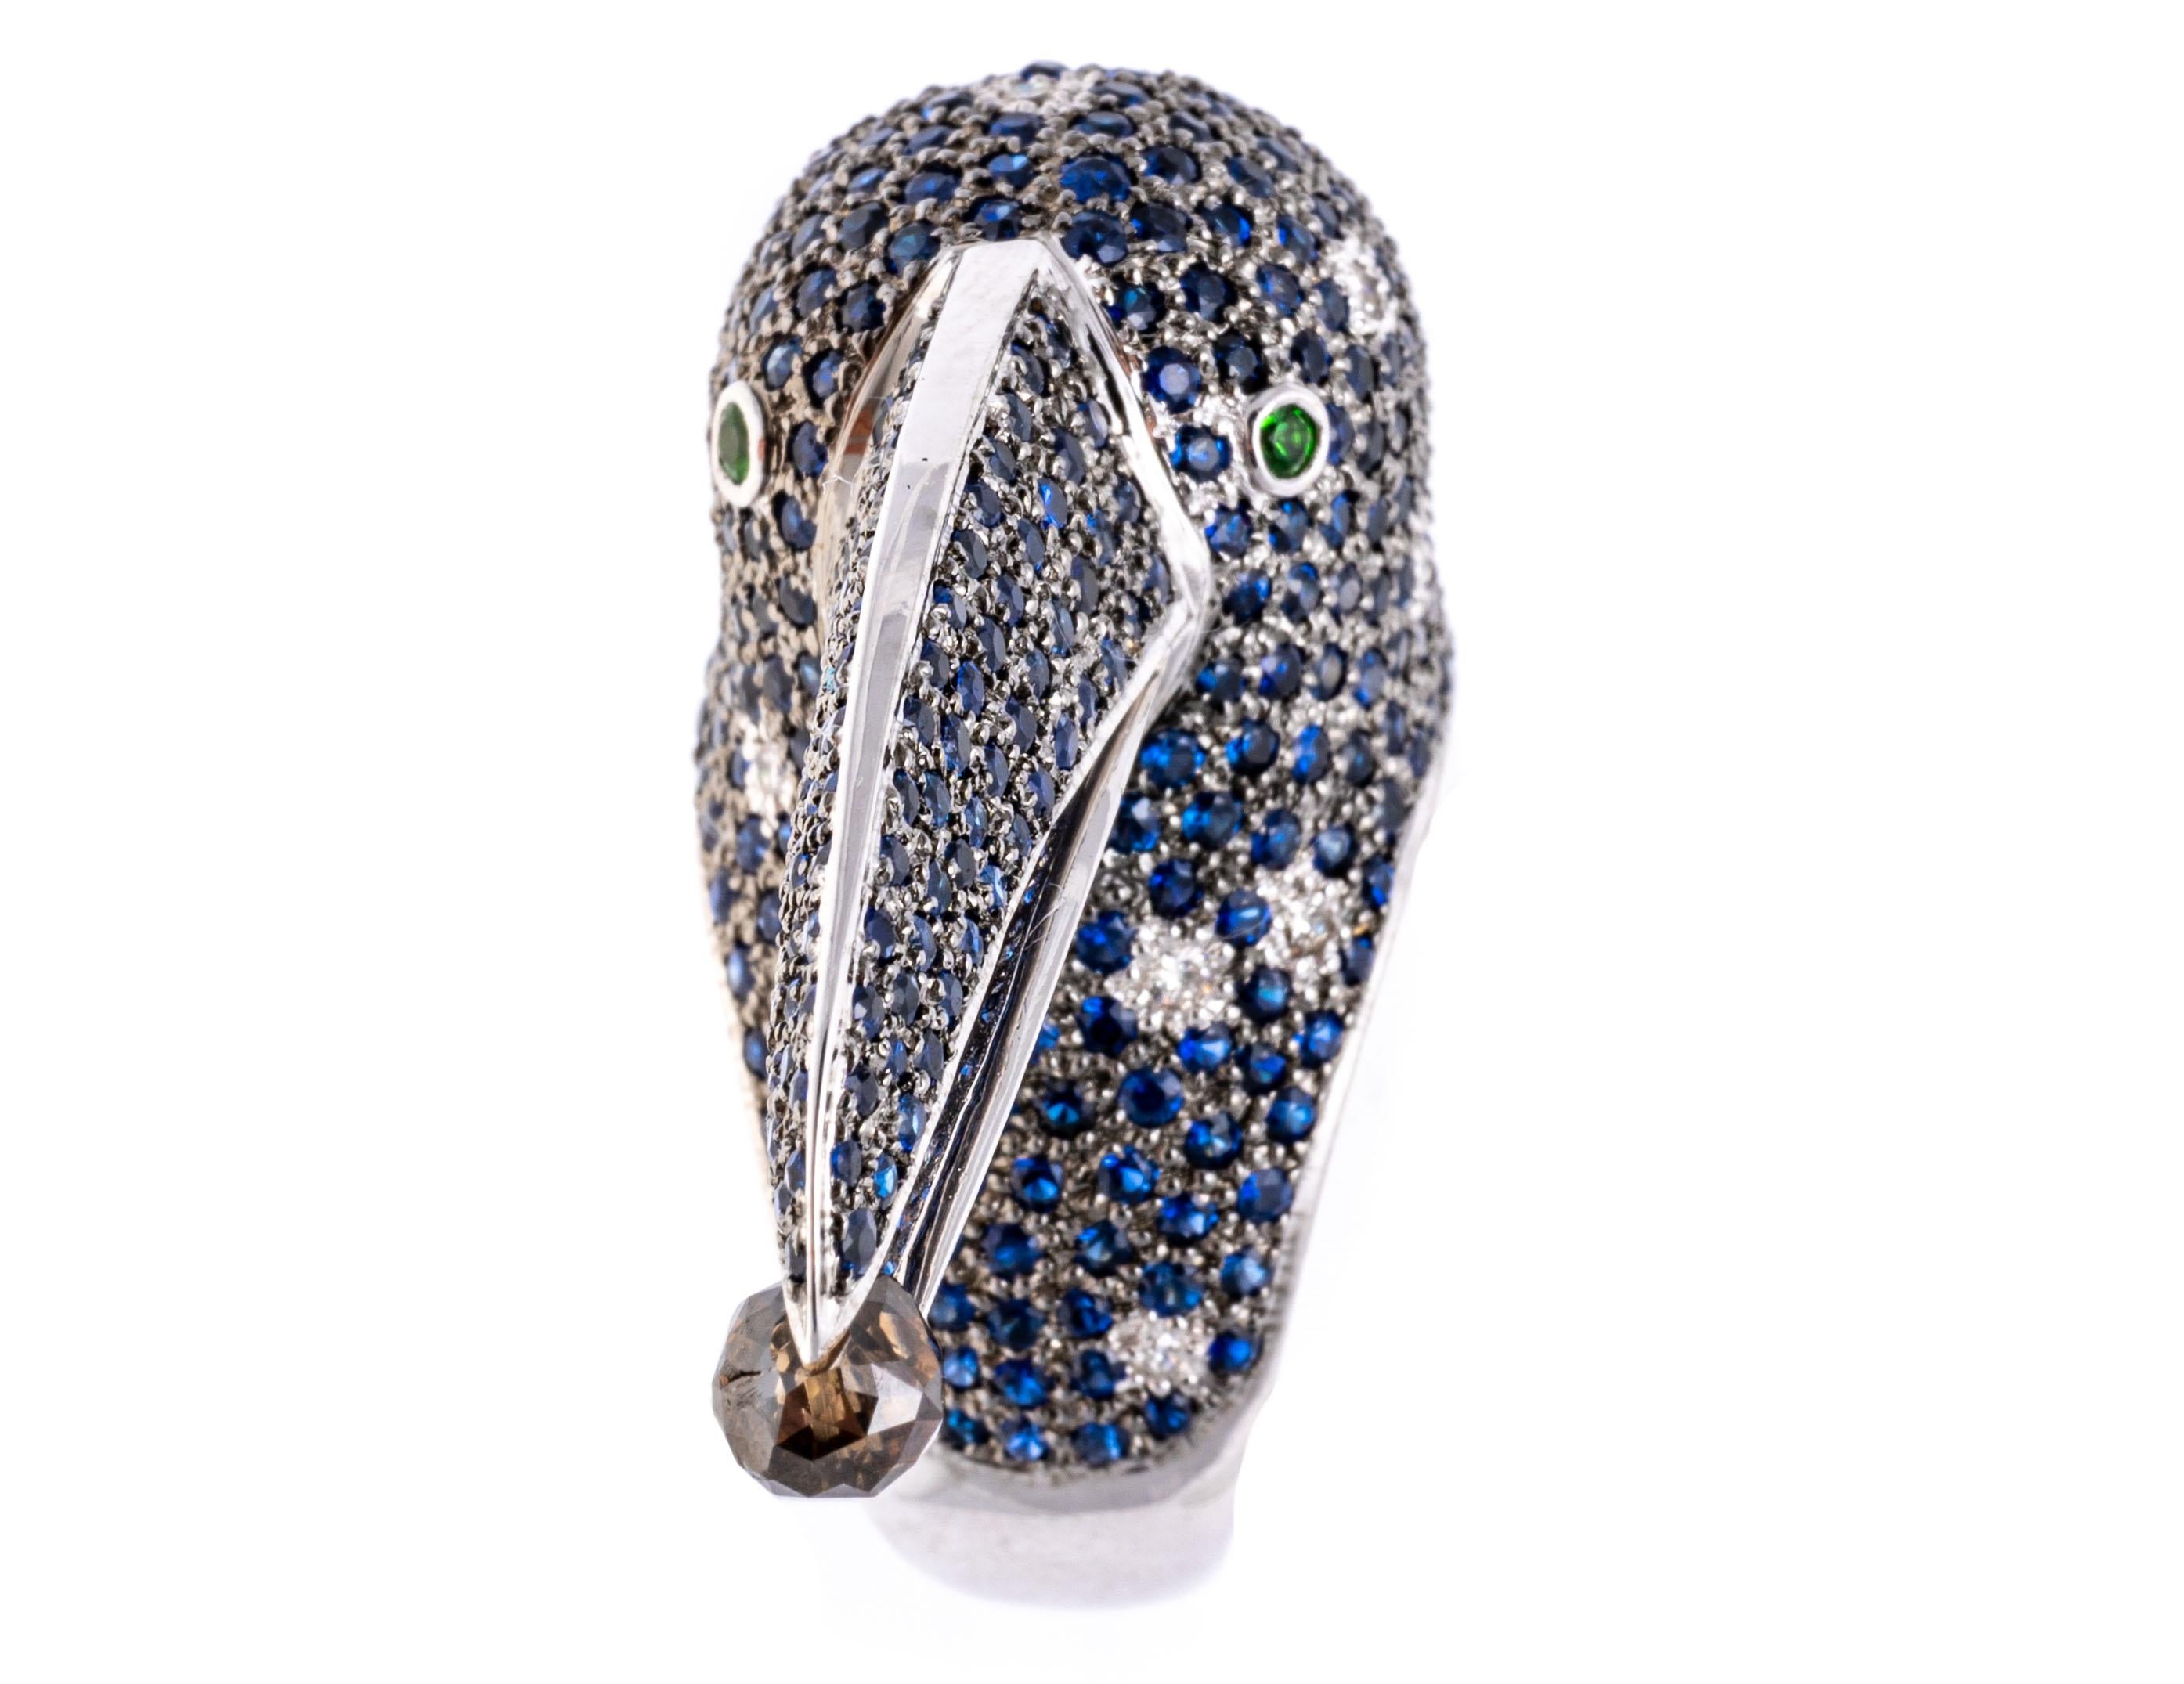 18k White Gold Pave Sapphire Toucan Ring, App. 4.38 TCW, With Diamonds For Sale 5